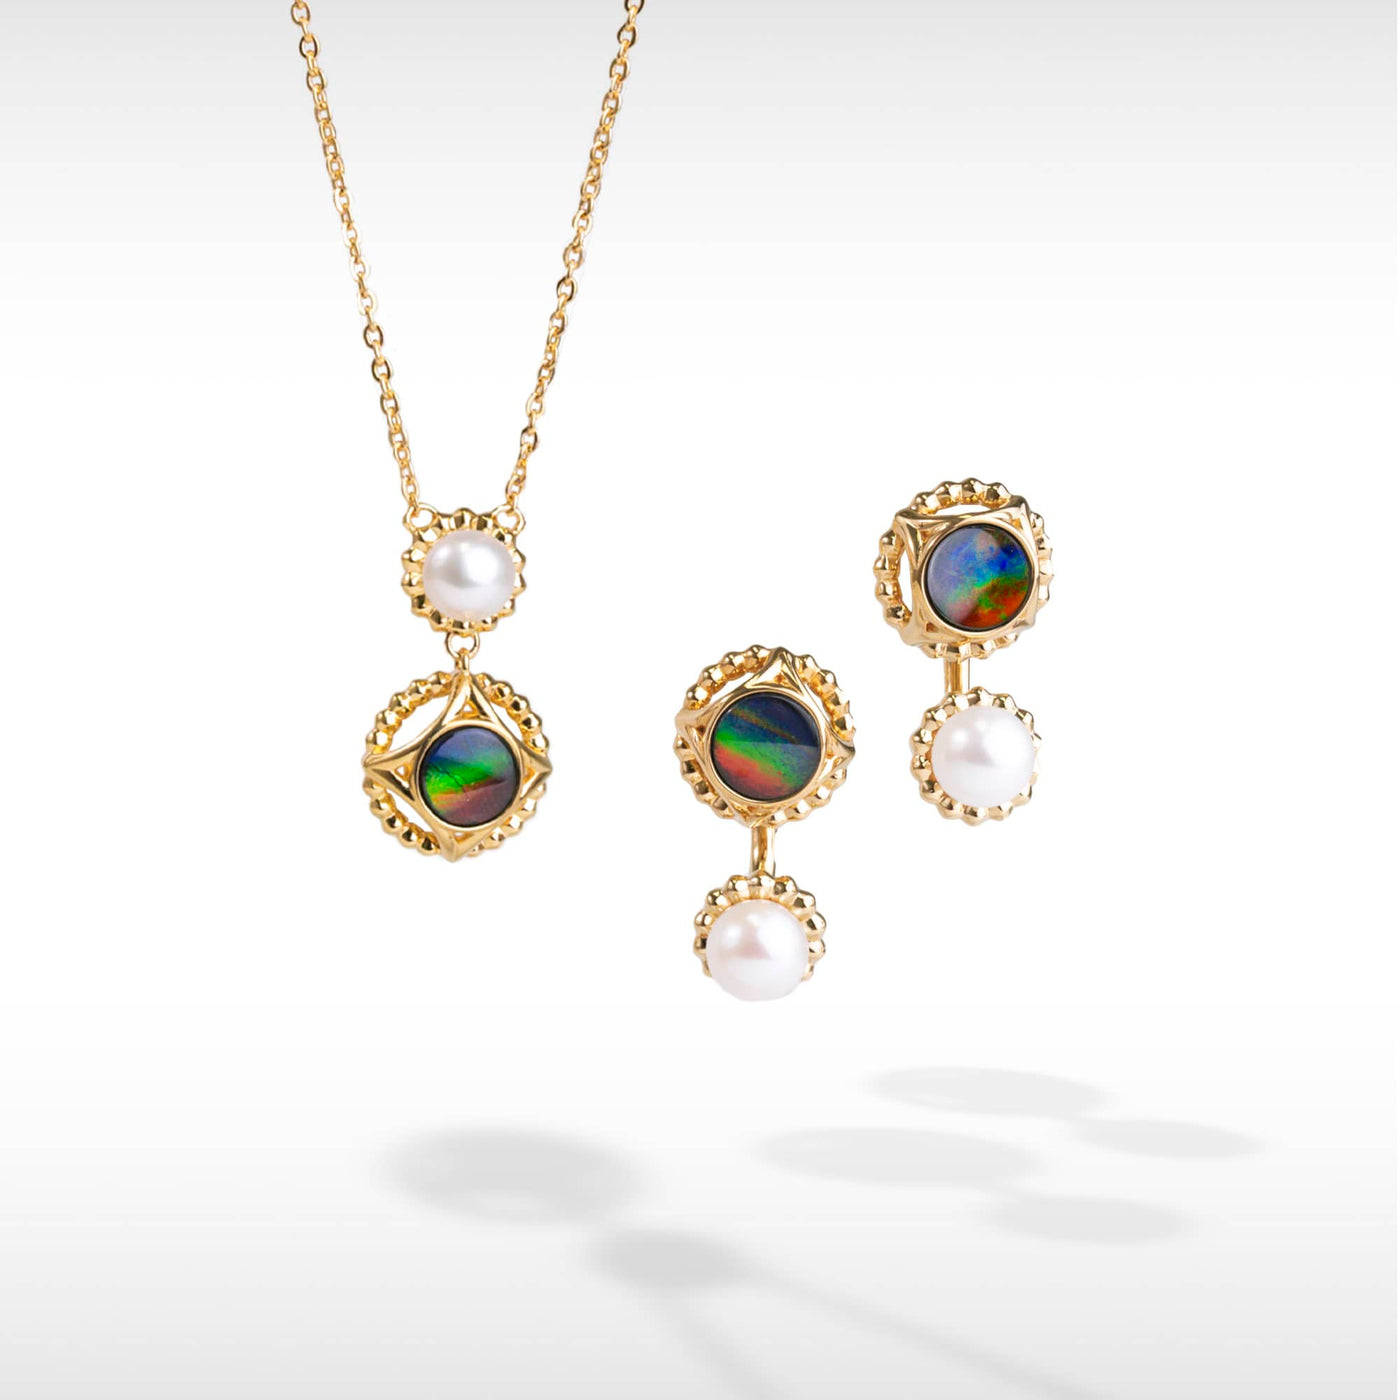 Pearl ammolite earring and pendant set in 18K gold plating